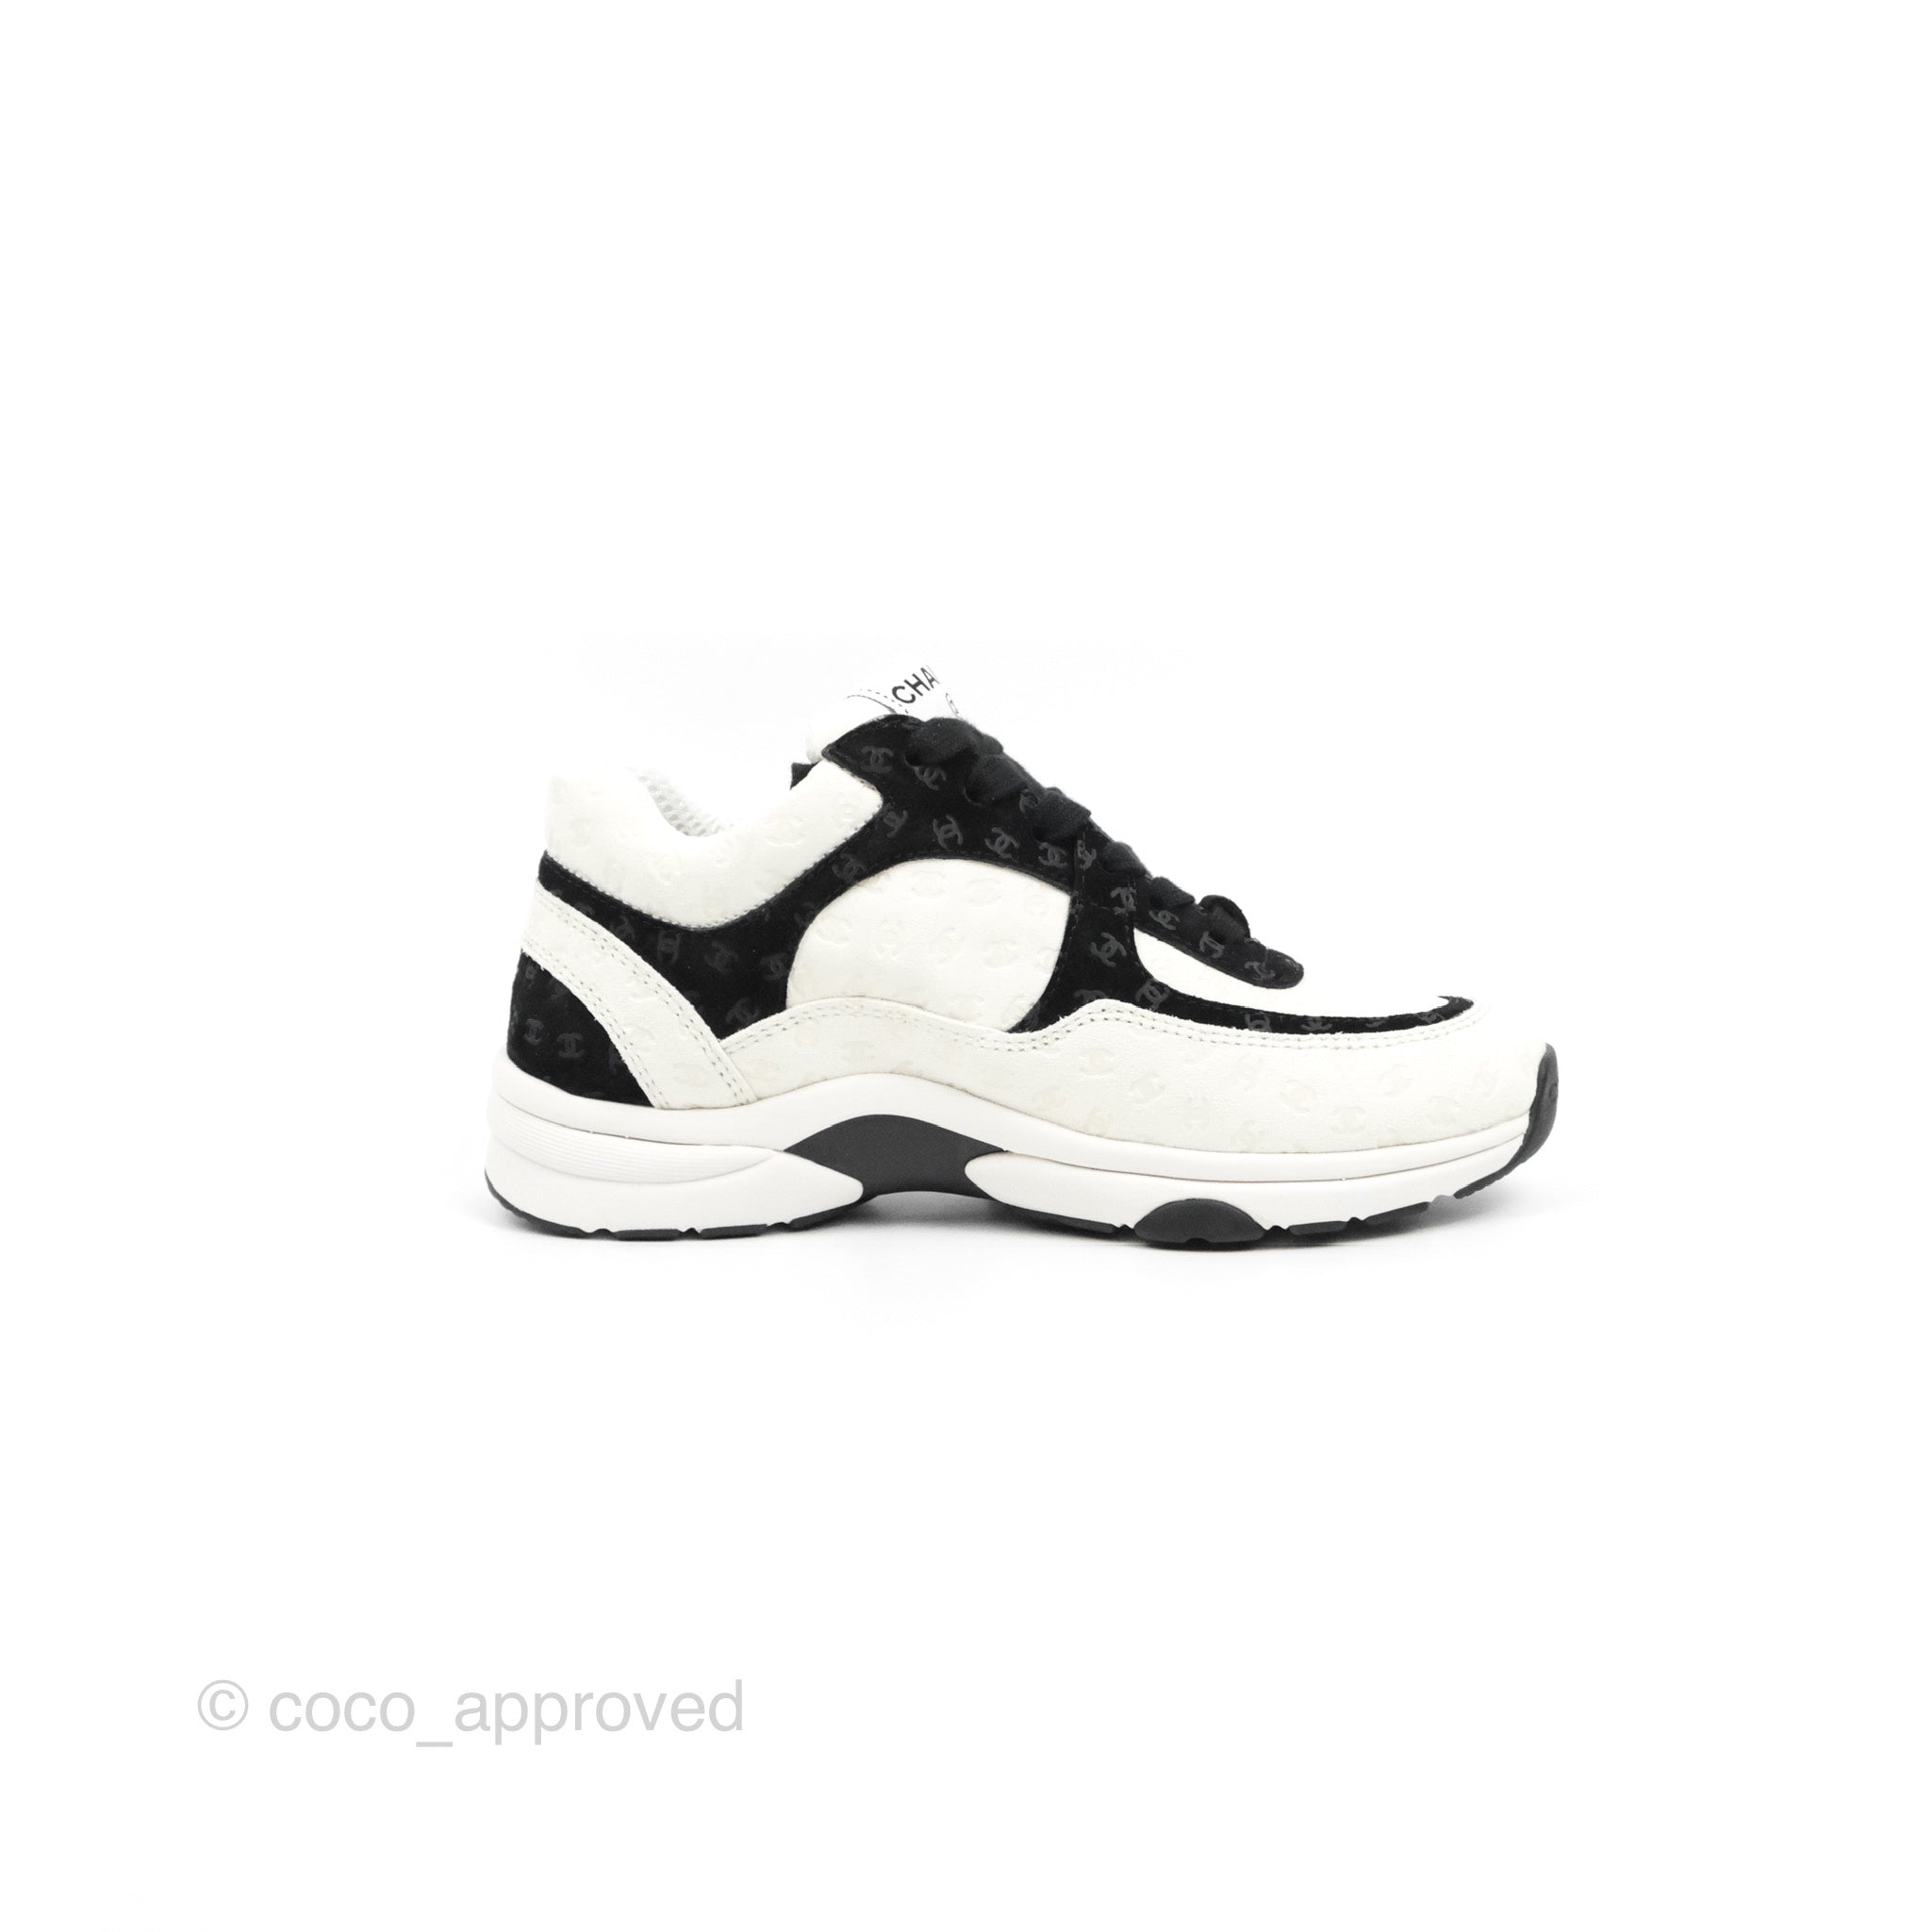 Chanel CC Sneakers Black/White Size 35 – Coco Approved Studio